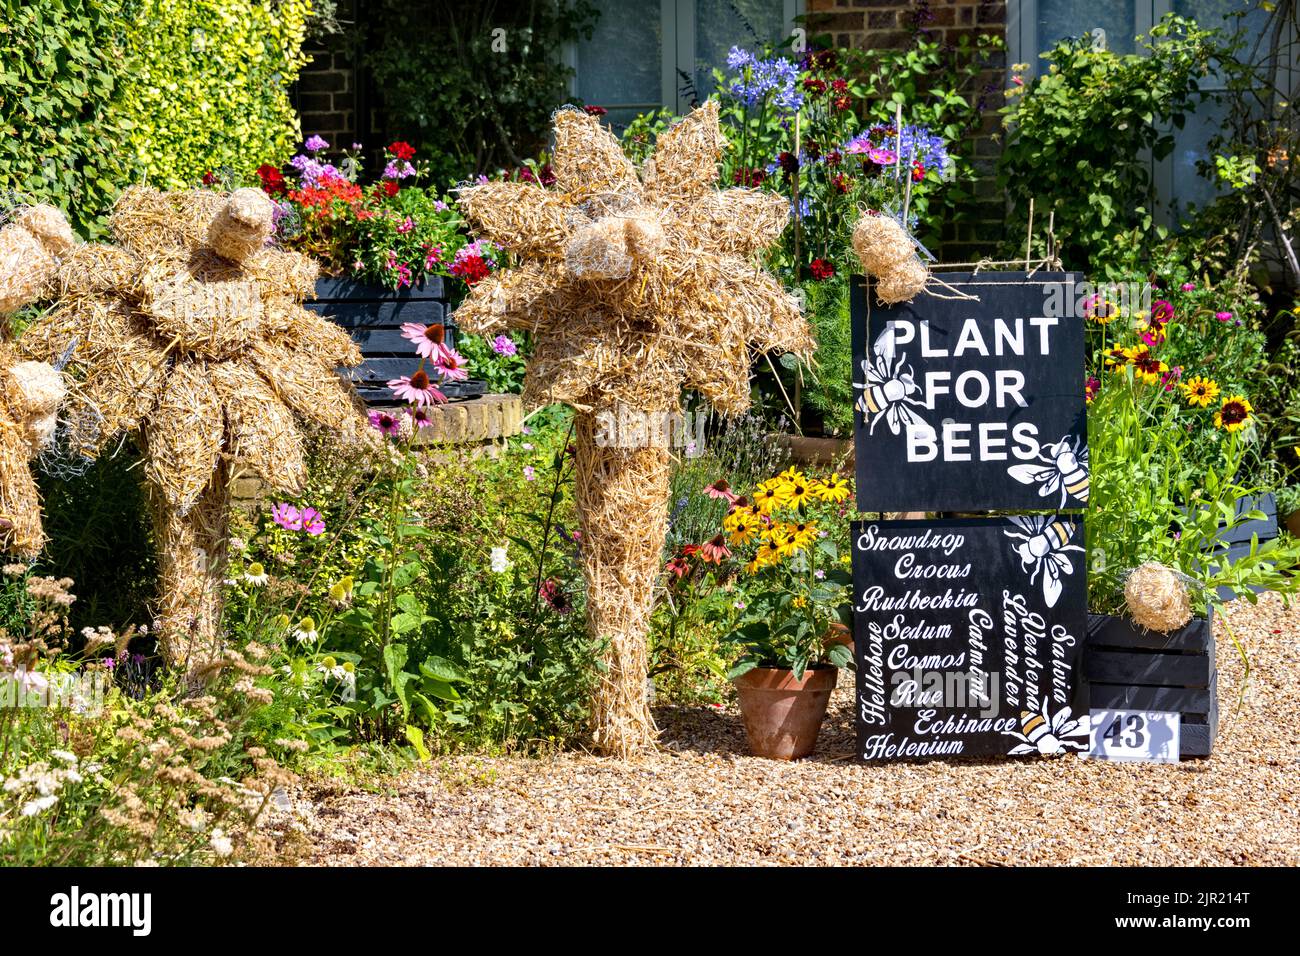 Flamstead scarecrow festival 2022, Flamstead, Herts - Plant for Bees scarecrow flowers Stock Photo